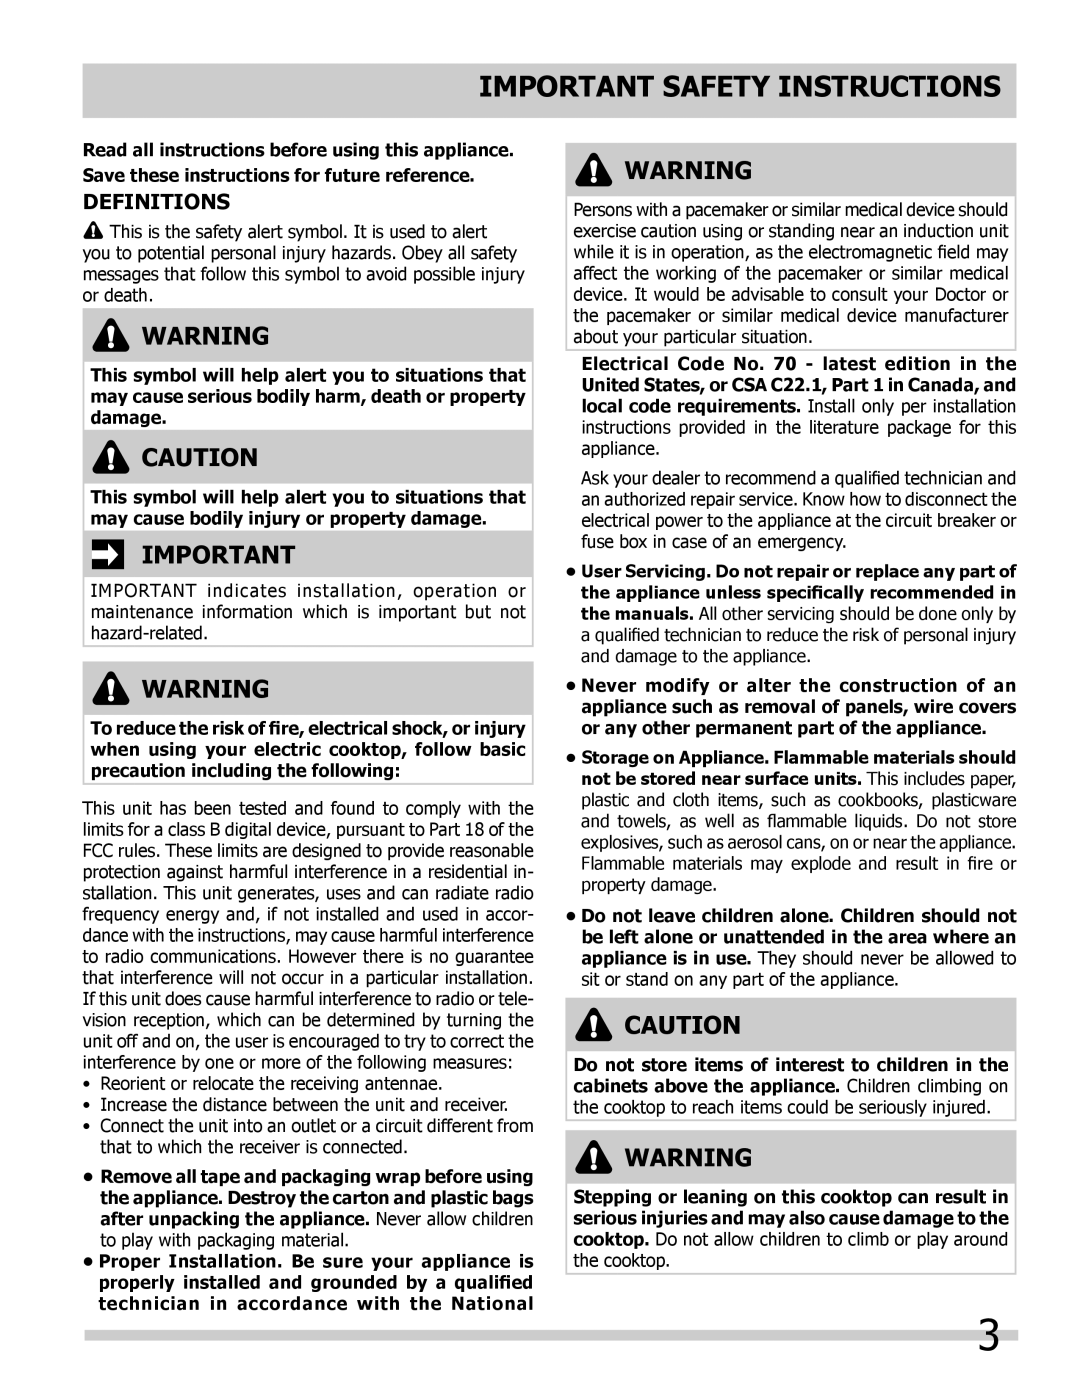 Frigidaire FPIC3695MS, FGIC3667MB, FGIC3067MB, FPIC3095MS Important Safety Instructions, Definitions 